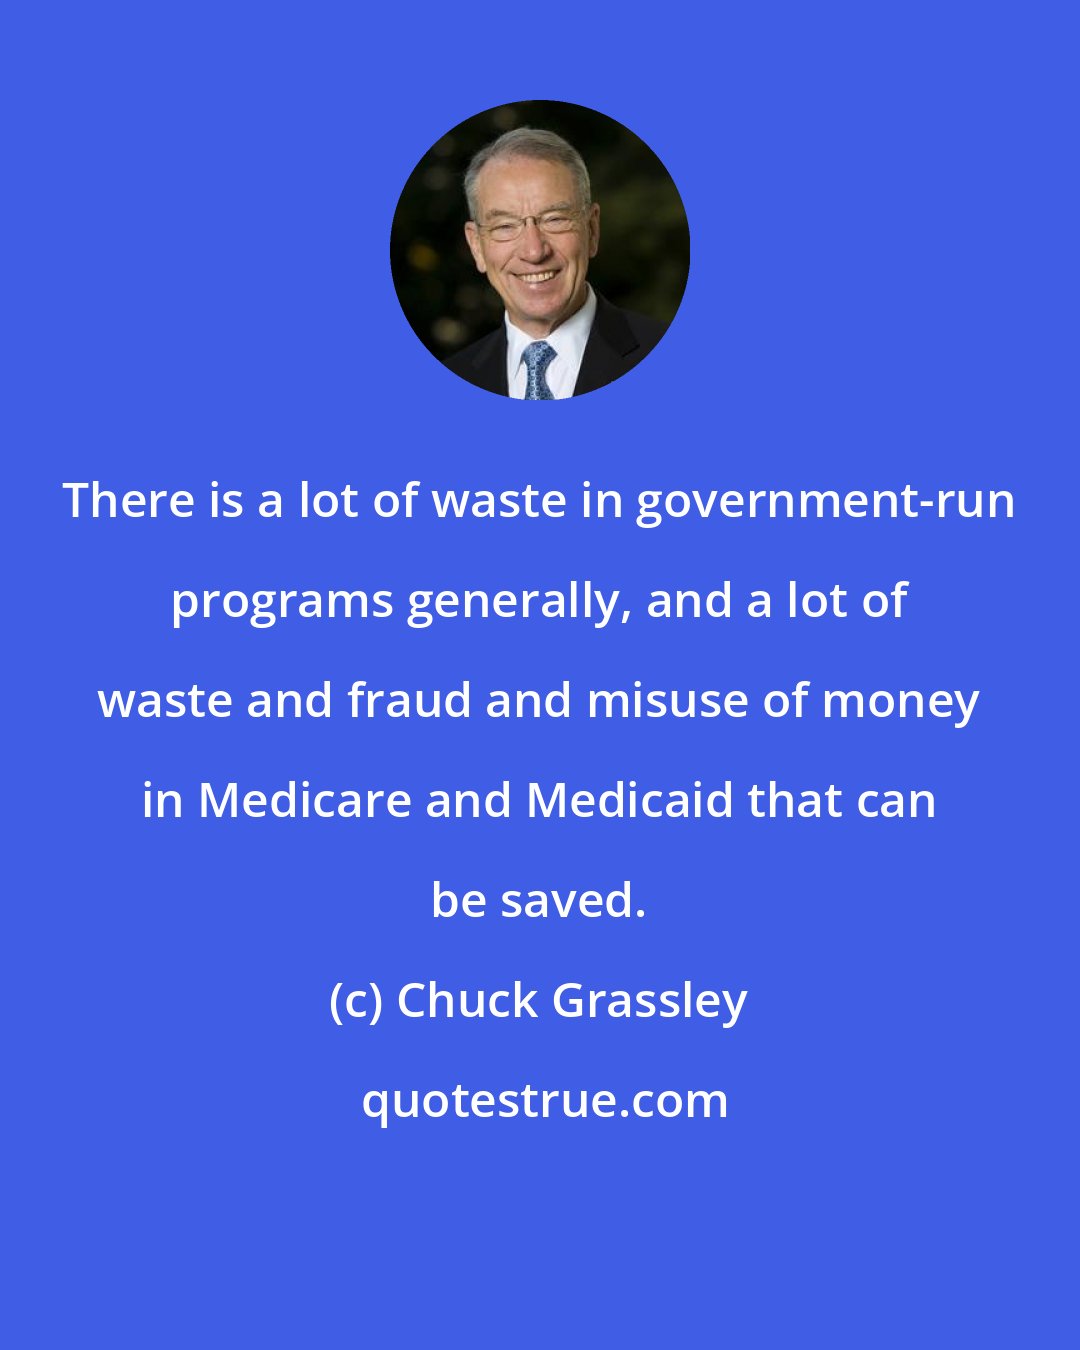 Chuck Grassley: There is a lot of waste in government-run programs generally, and a lot of waste and fraud and misuse of money in Medicare and Medicaid that can be saved.